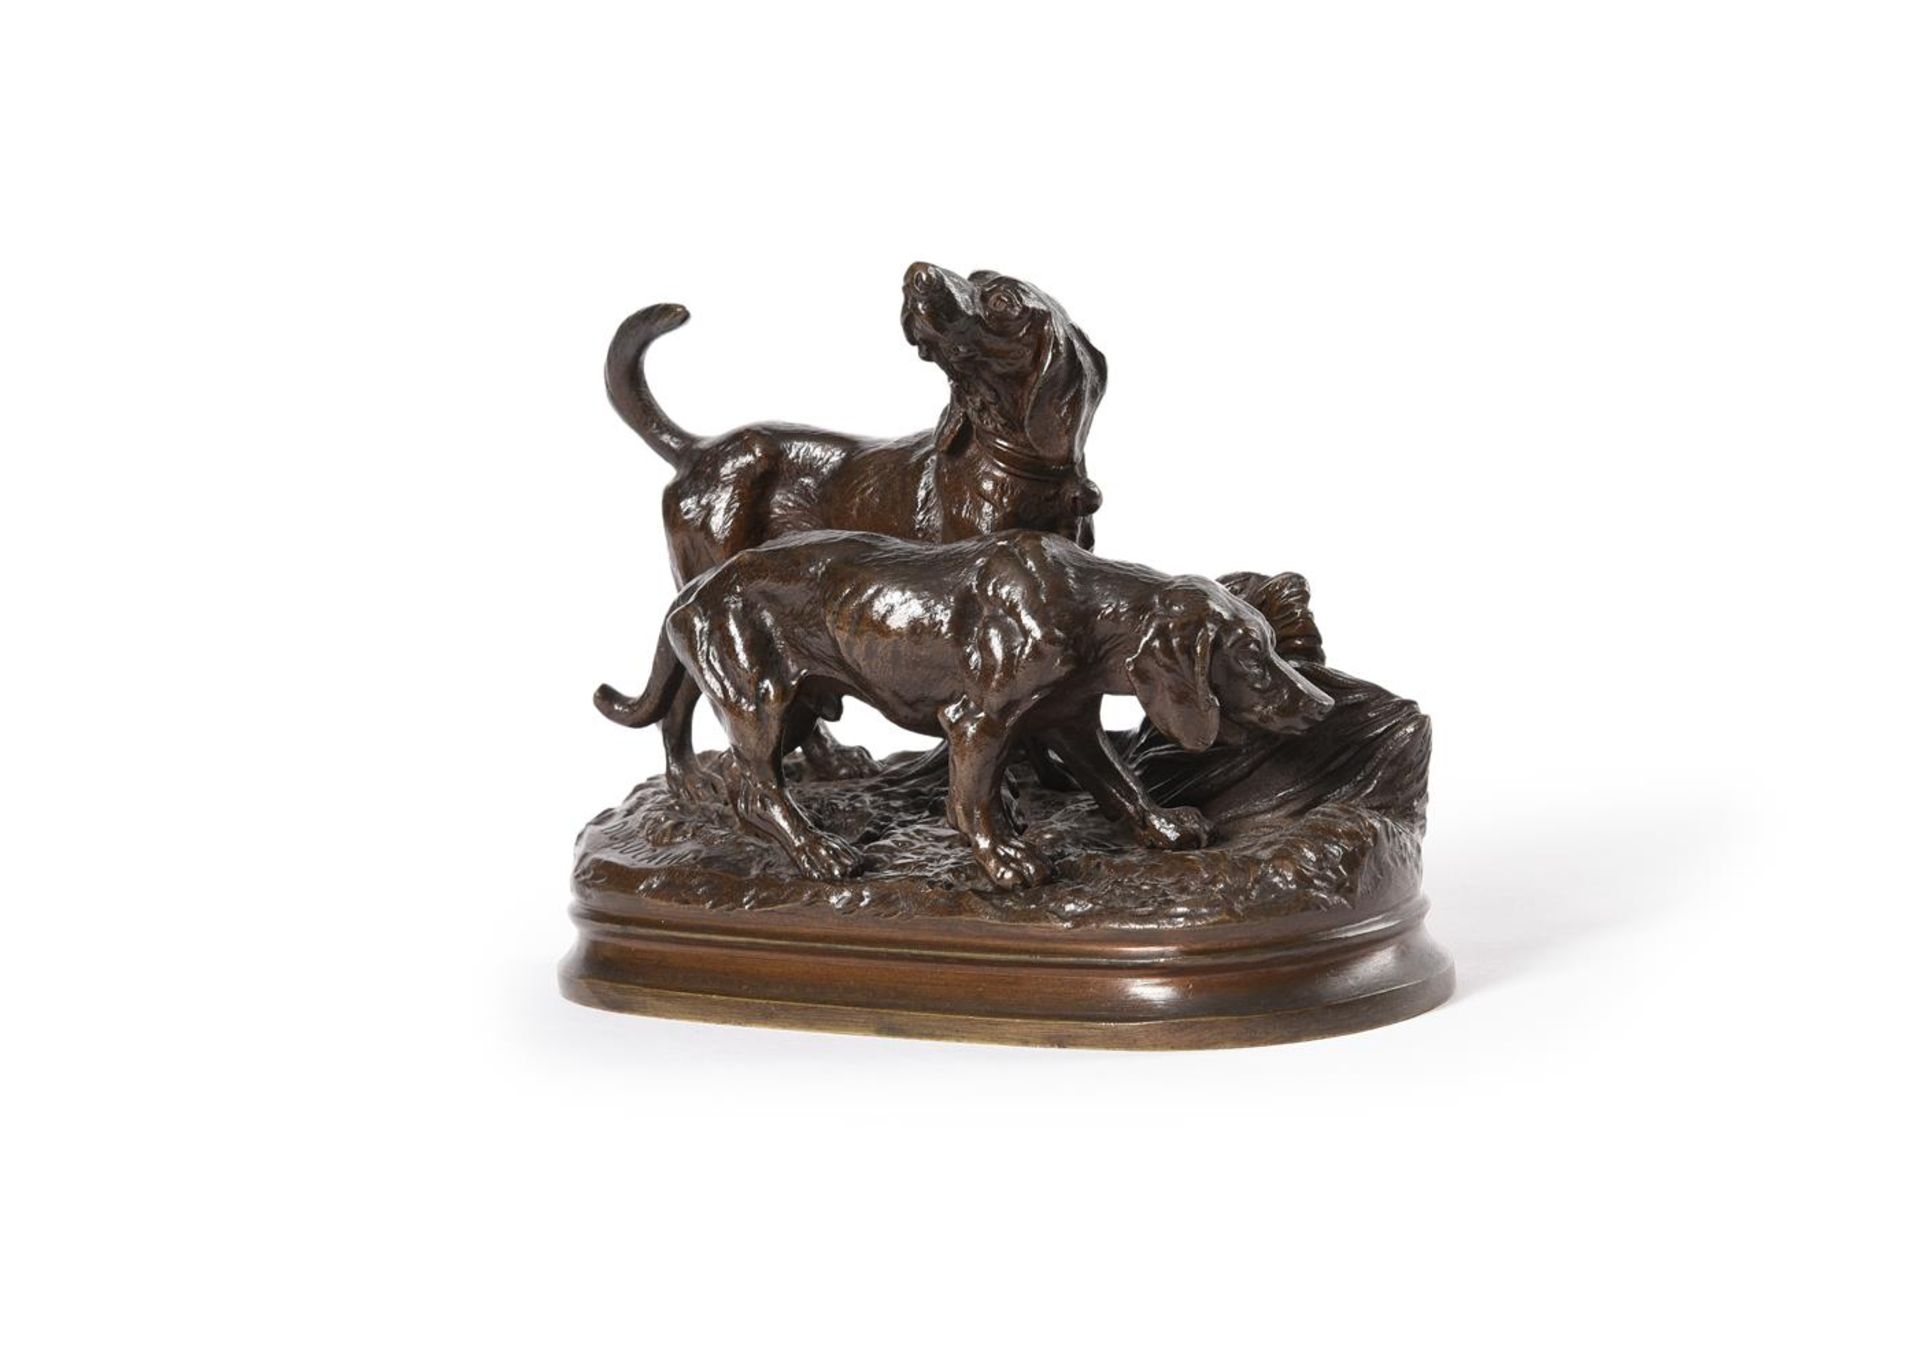 ALFRED DUBUCAND (FRENCH, 1828-1894), A BRONZE ANIMALIER DOG GROUP, LATE 19TH CENTURY